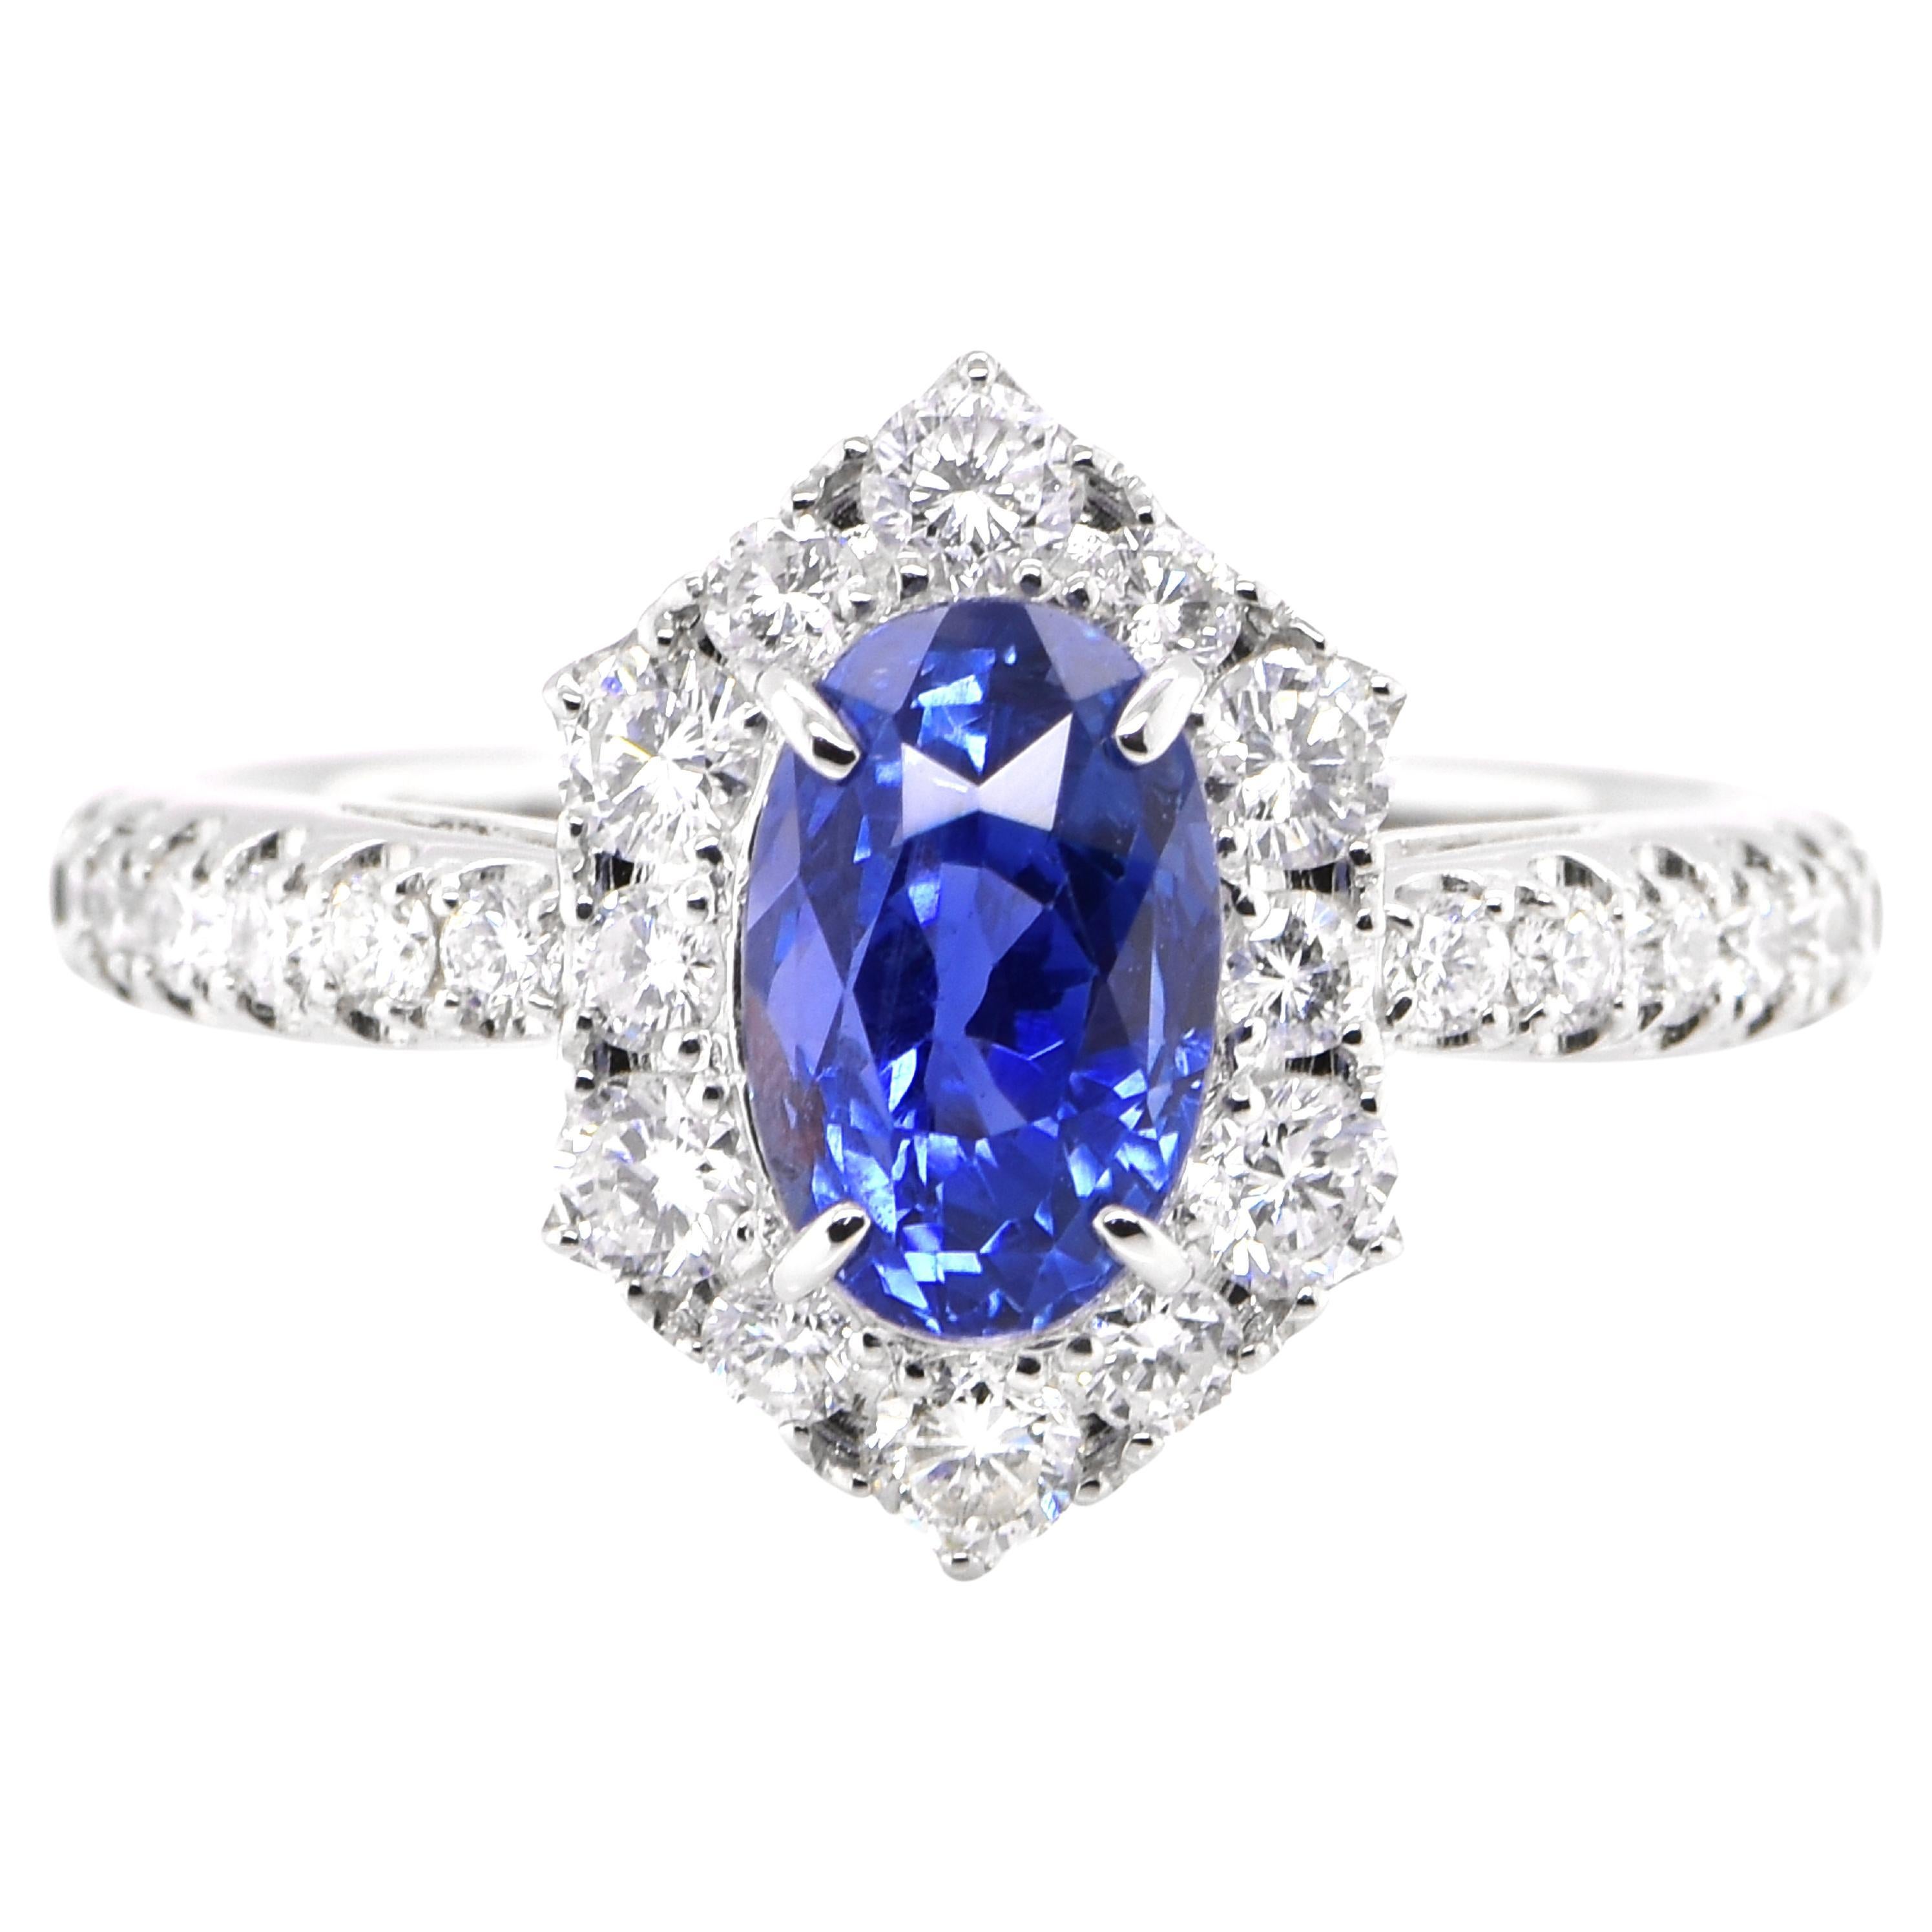 2.27 Carat Natural Unheated, Ceylon Sapphire and Diamond Ring set in Platinum For Sale